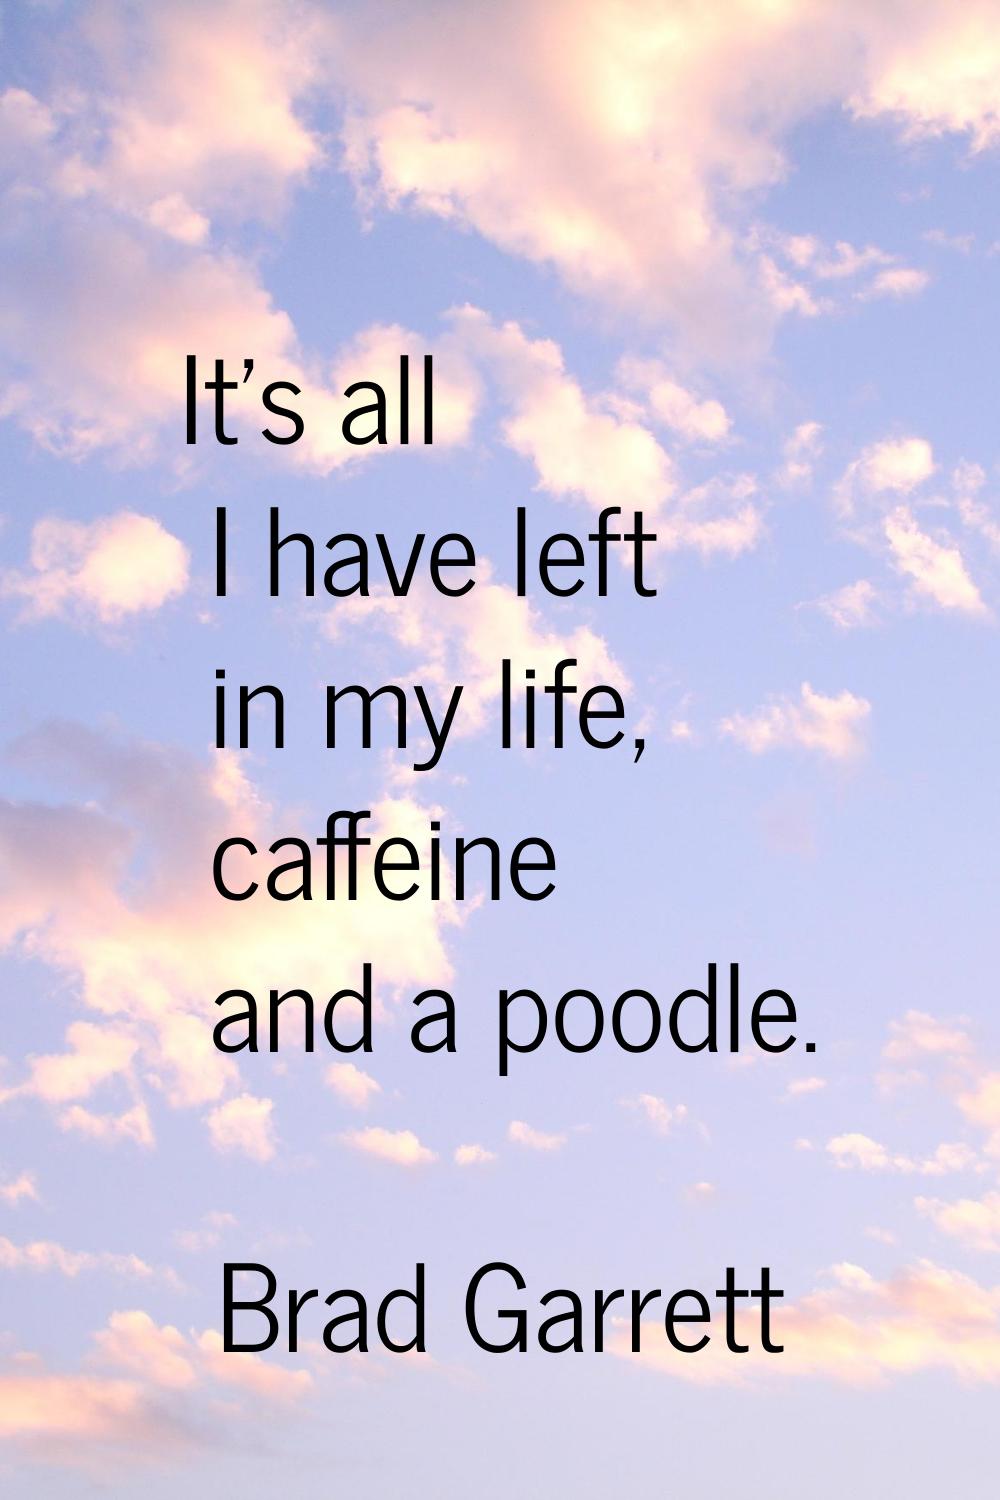 It's all I have left in my life, caffeine and a poodle.